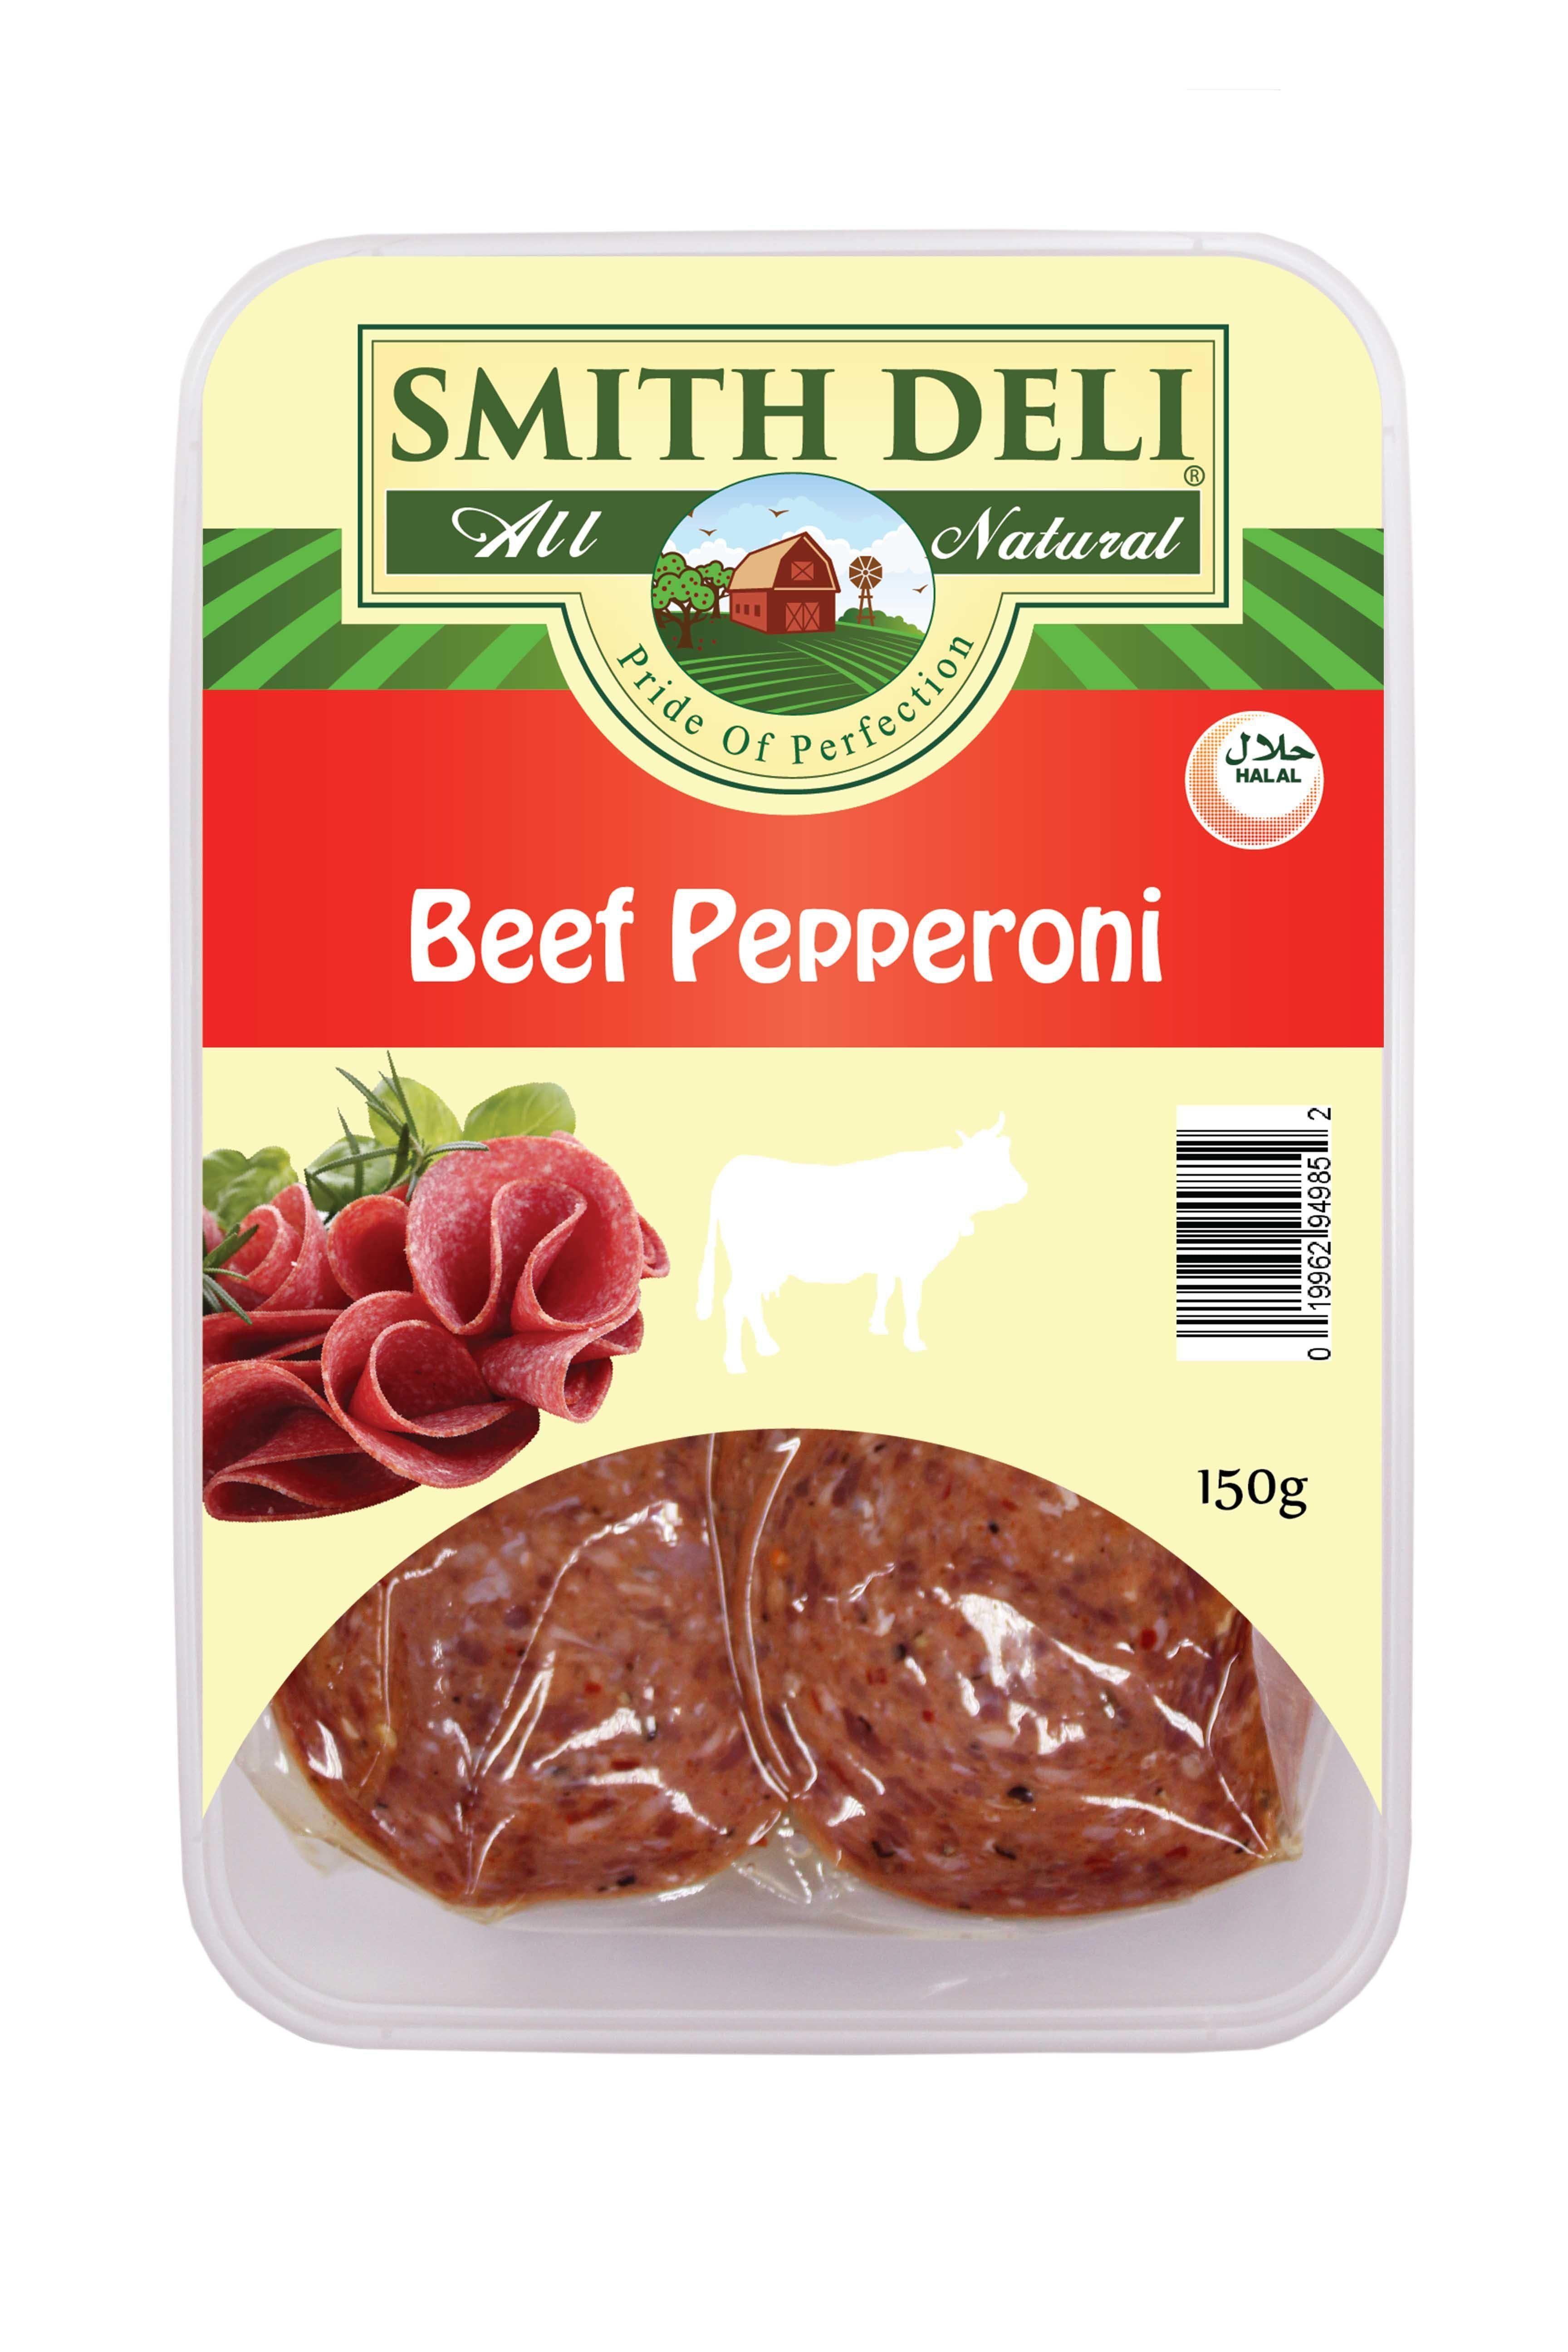 

Beef Pepperoni 150gm - Packet